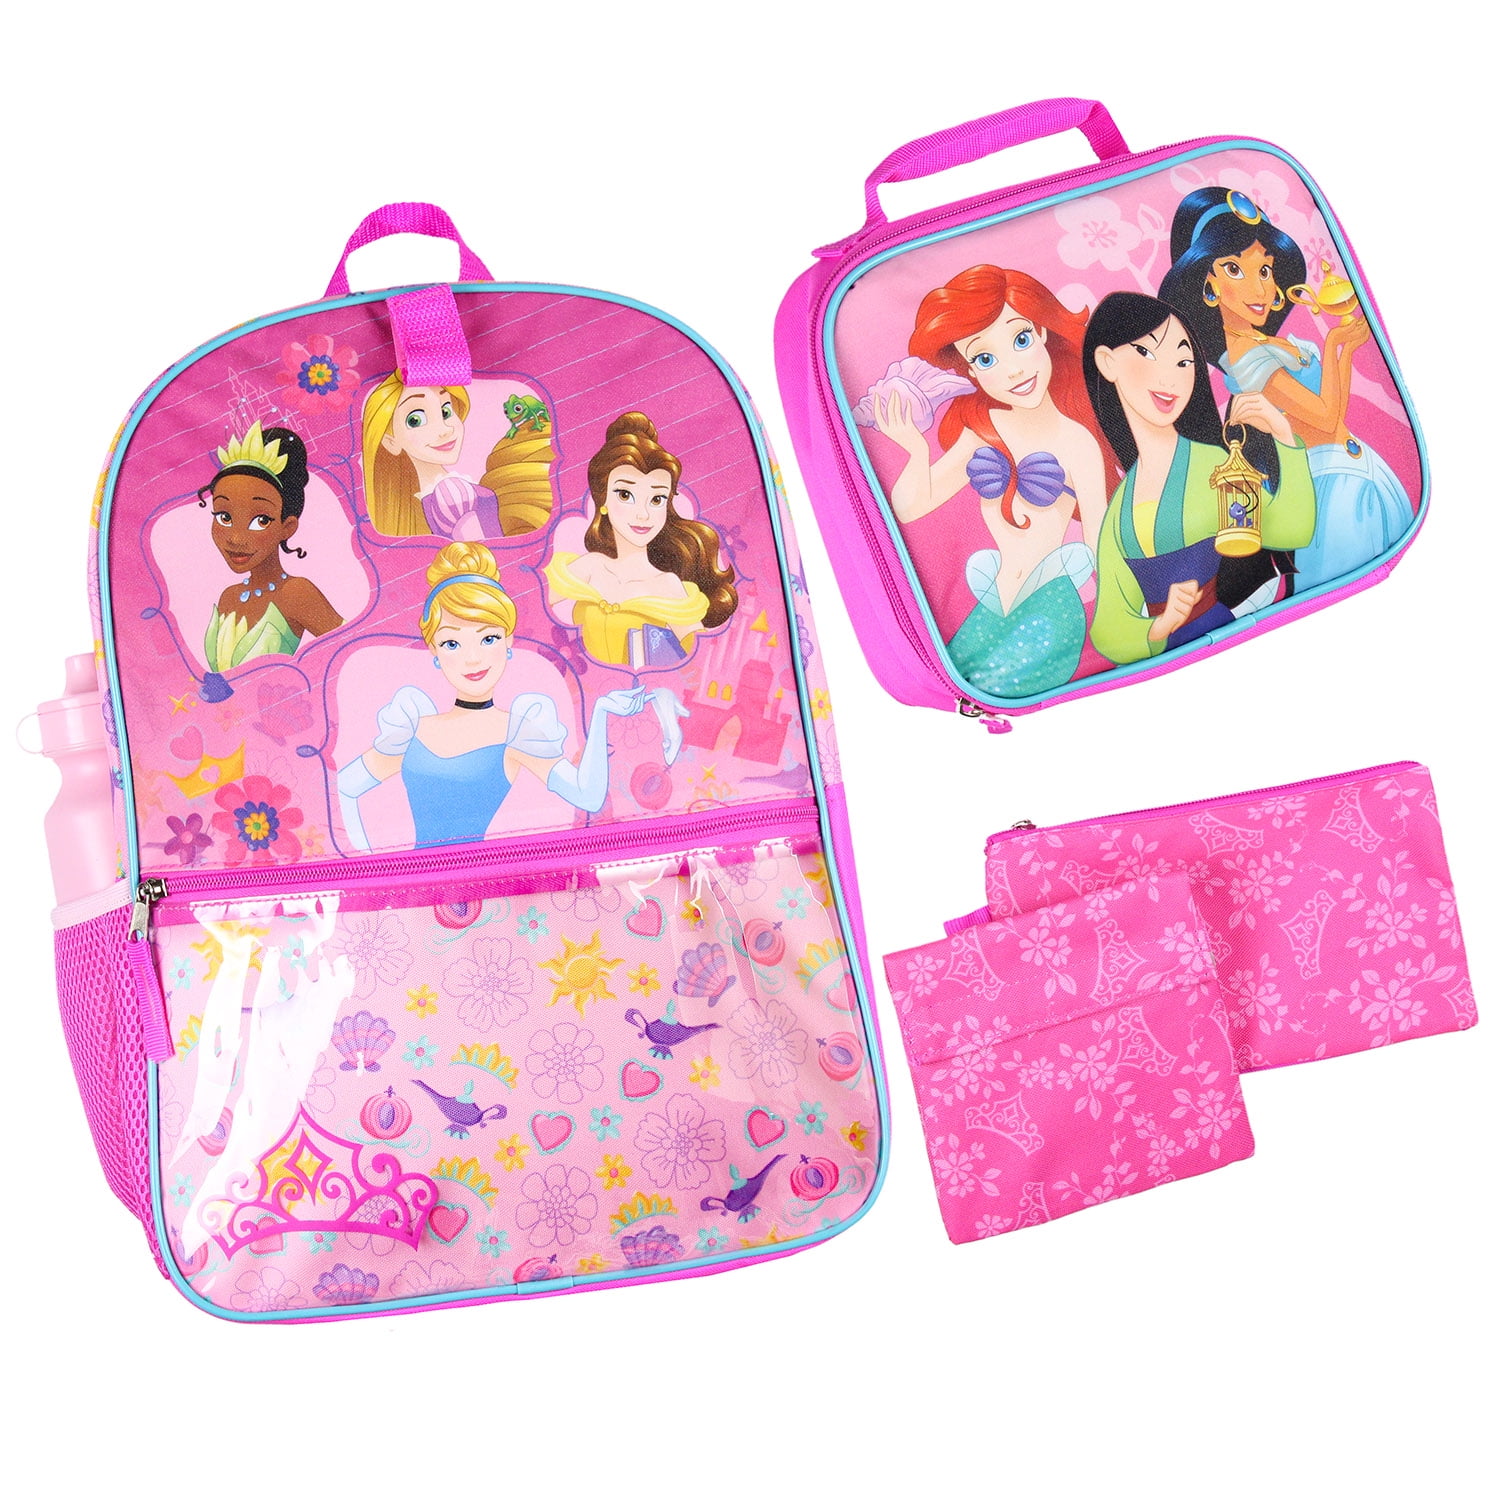 Disney Princess 16 inch Backpack for Girls 5 Piece School Lunch